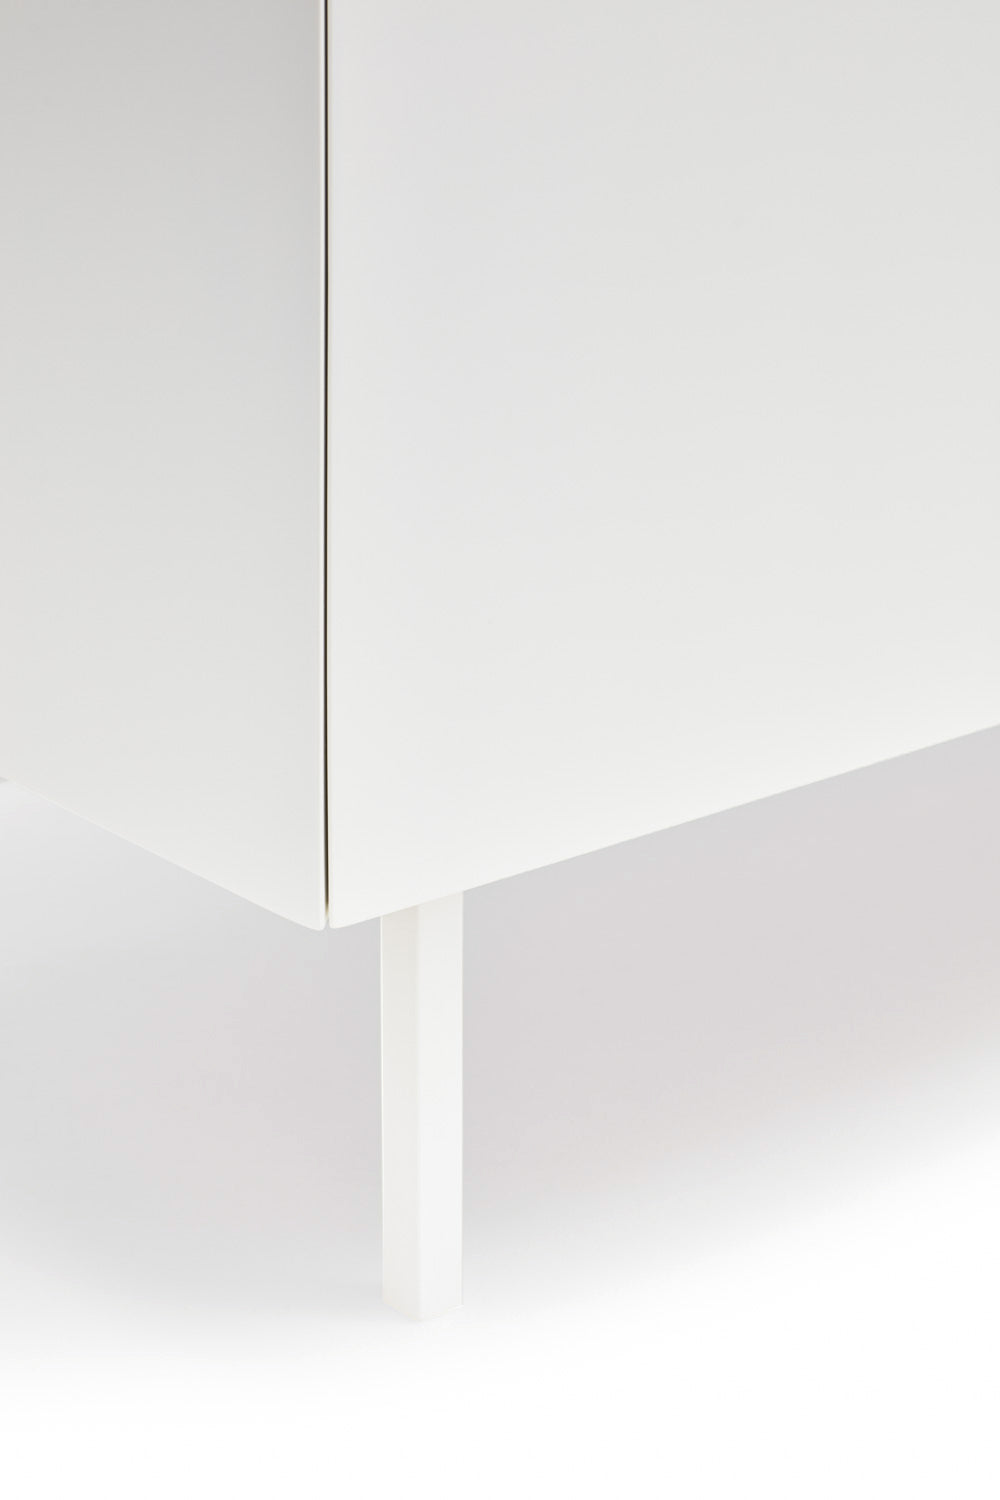 ARISTA white chest of drawers